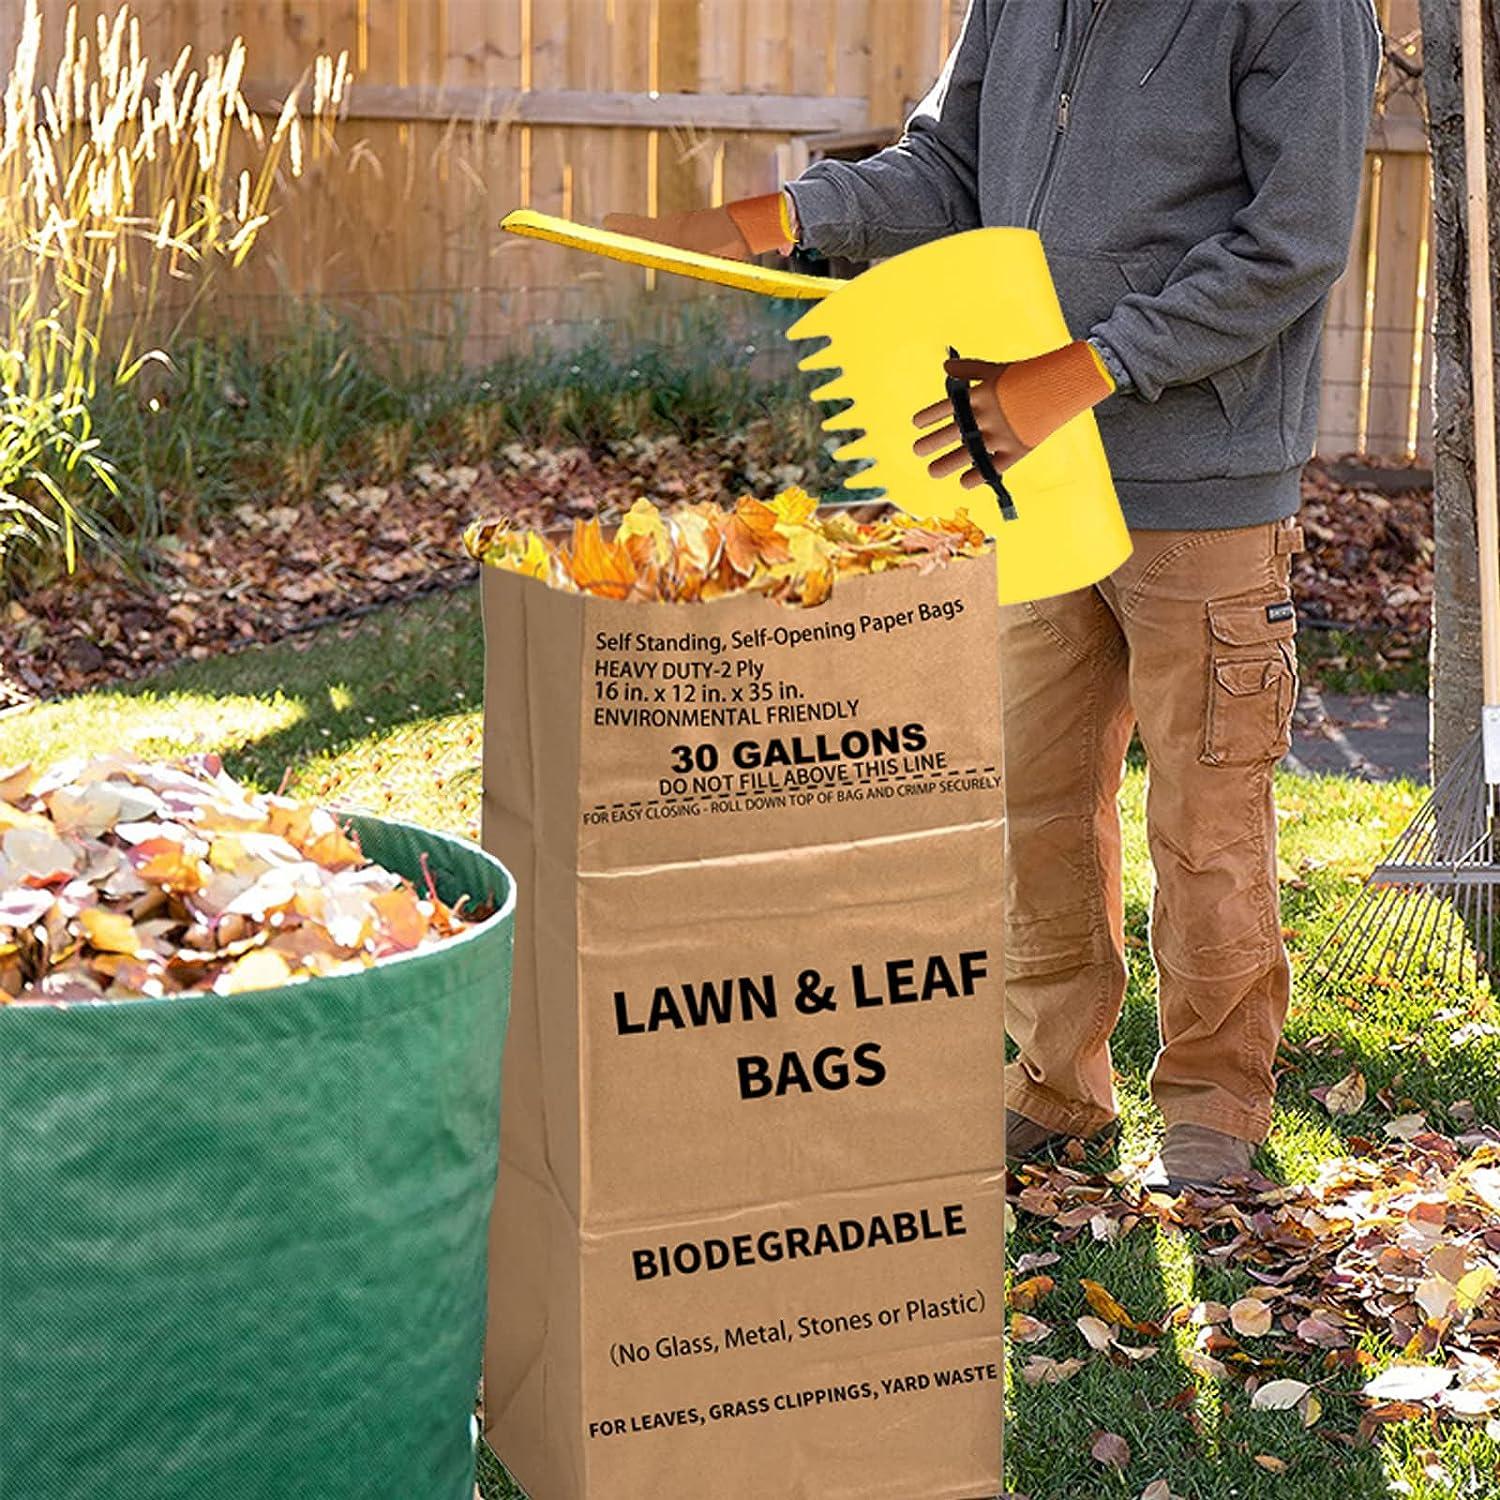 Lawn & Leaf Bags Manufacturers and Suppliers in the USA